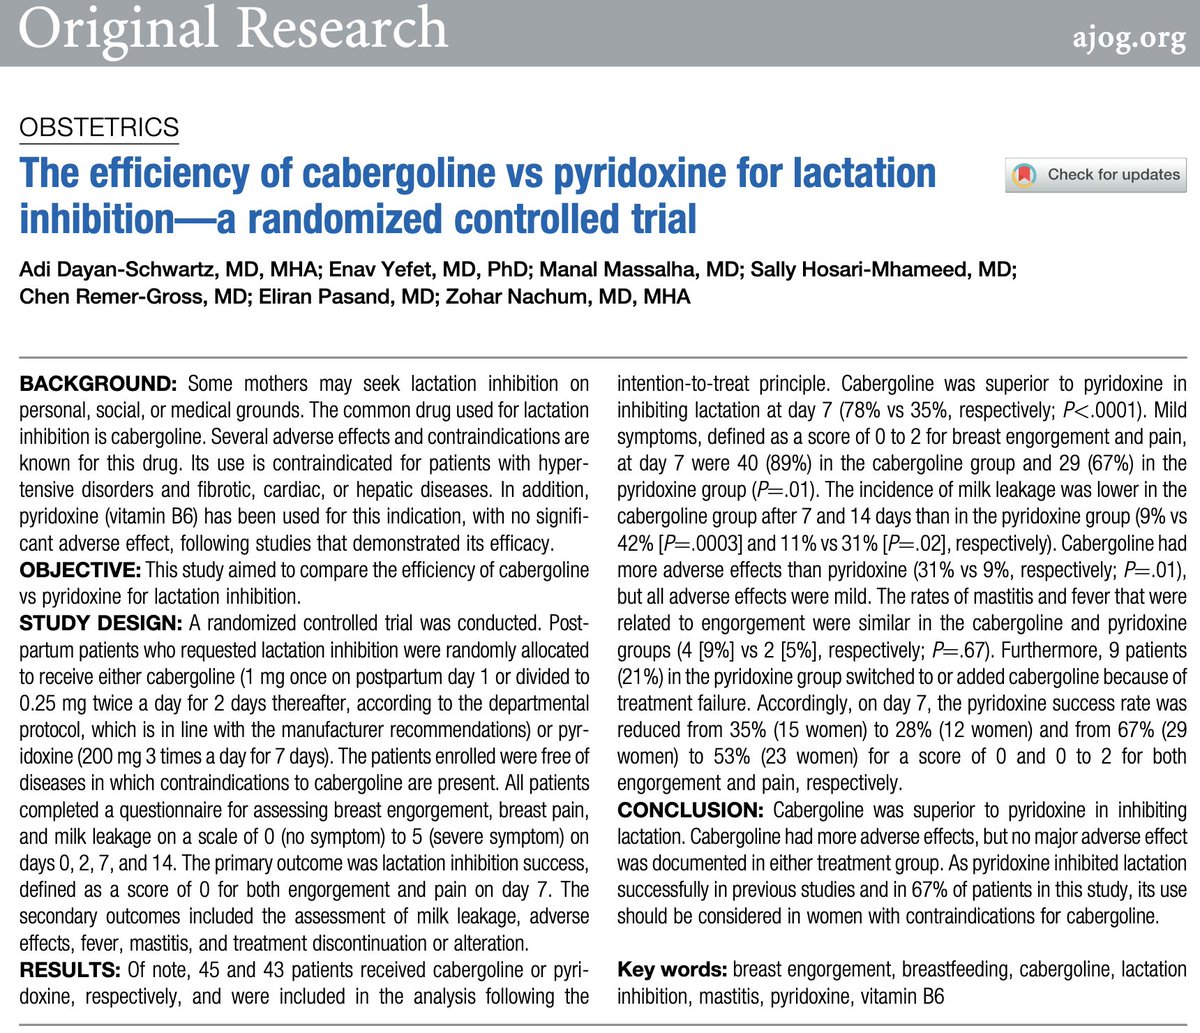 The efficiency of cabergoline vs pyridoxine for lactation inhibition—a randomized controlled trial ow.ly/YgNx50ROs09